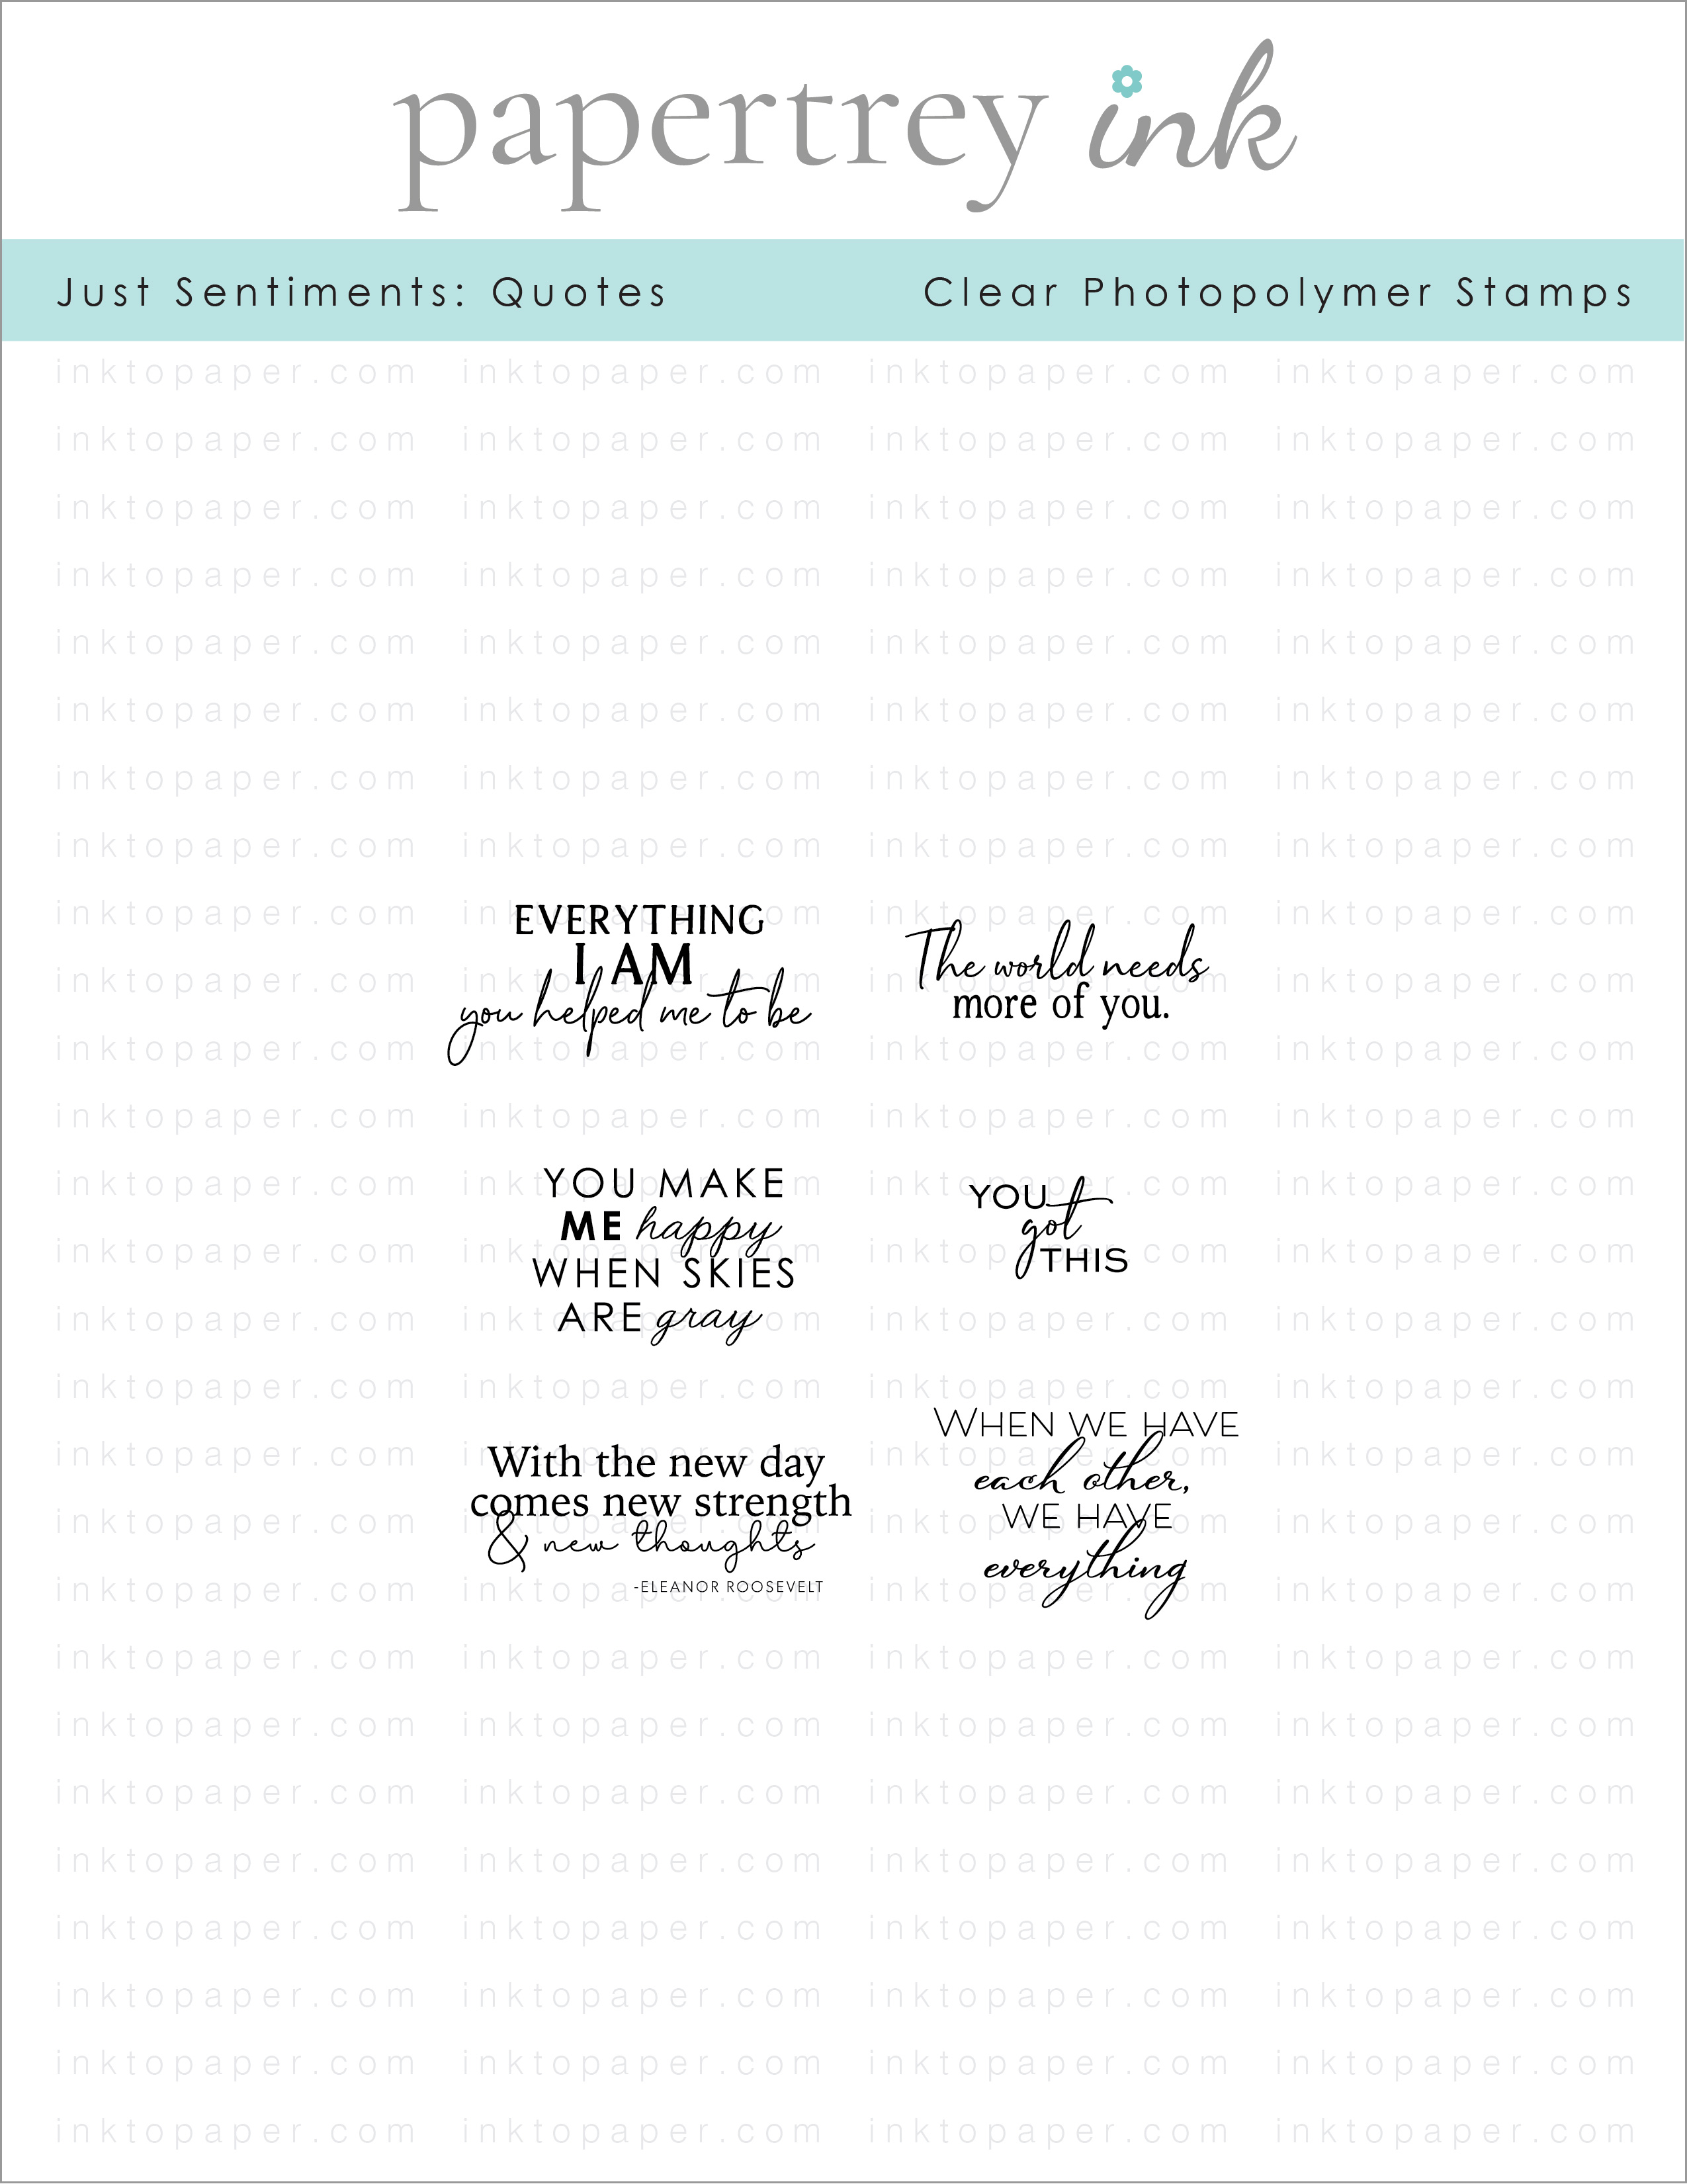 Just Sentiments: Quotes Mini Stamp Set: Papertrey Ink